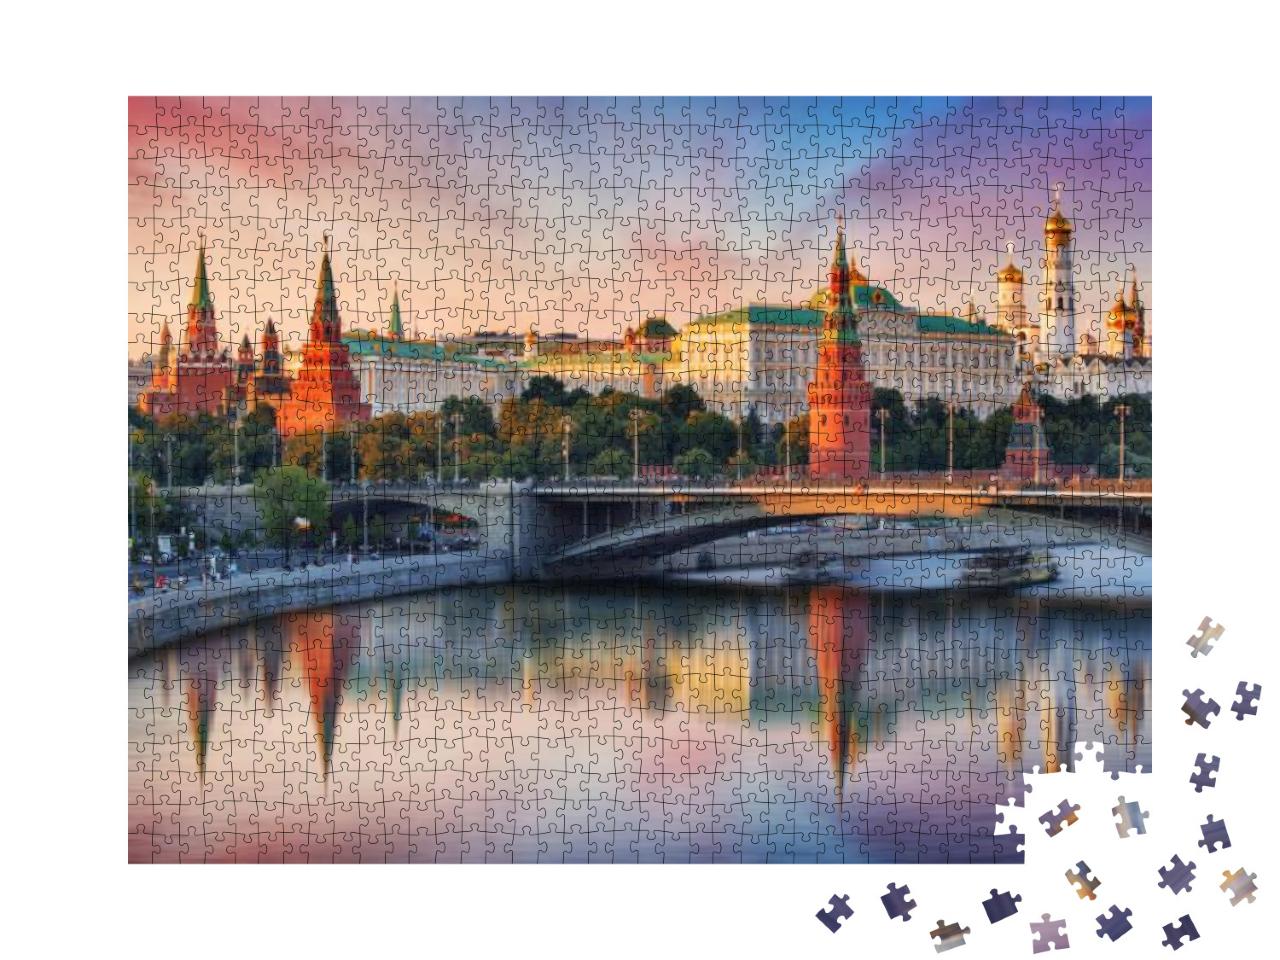 Moscow, Kremlin & Moskva River, Russia... Jigsaw Puzzle with 1000 pieces